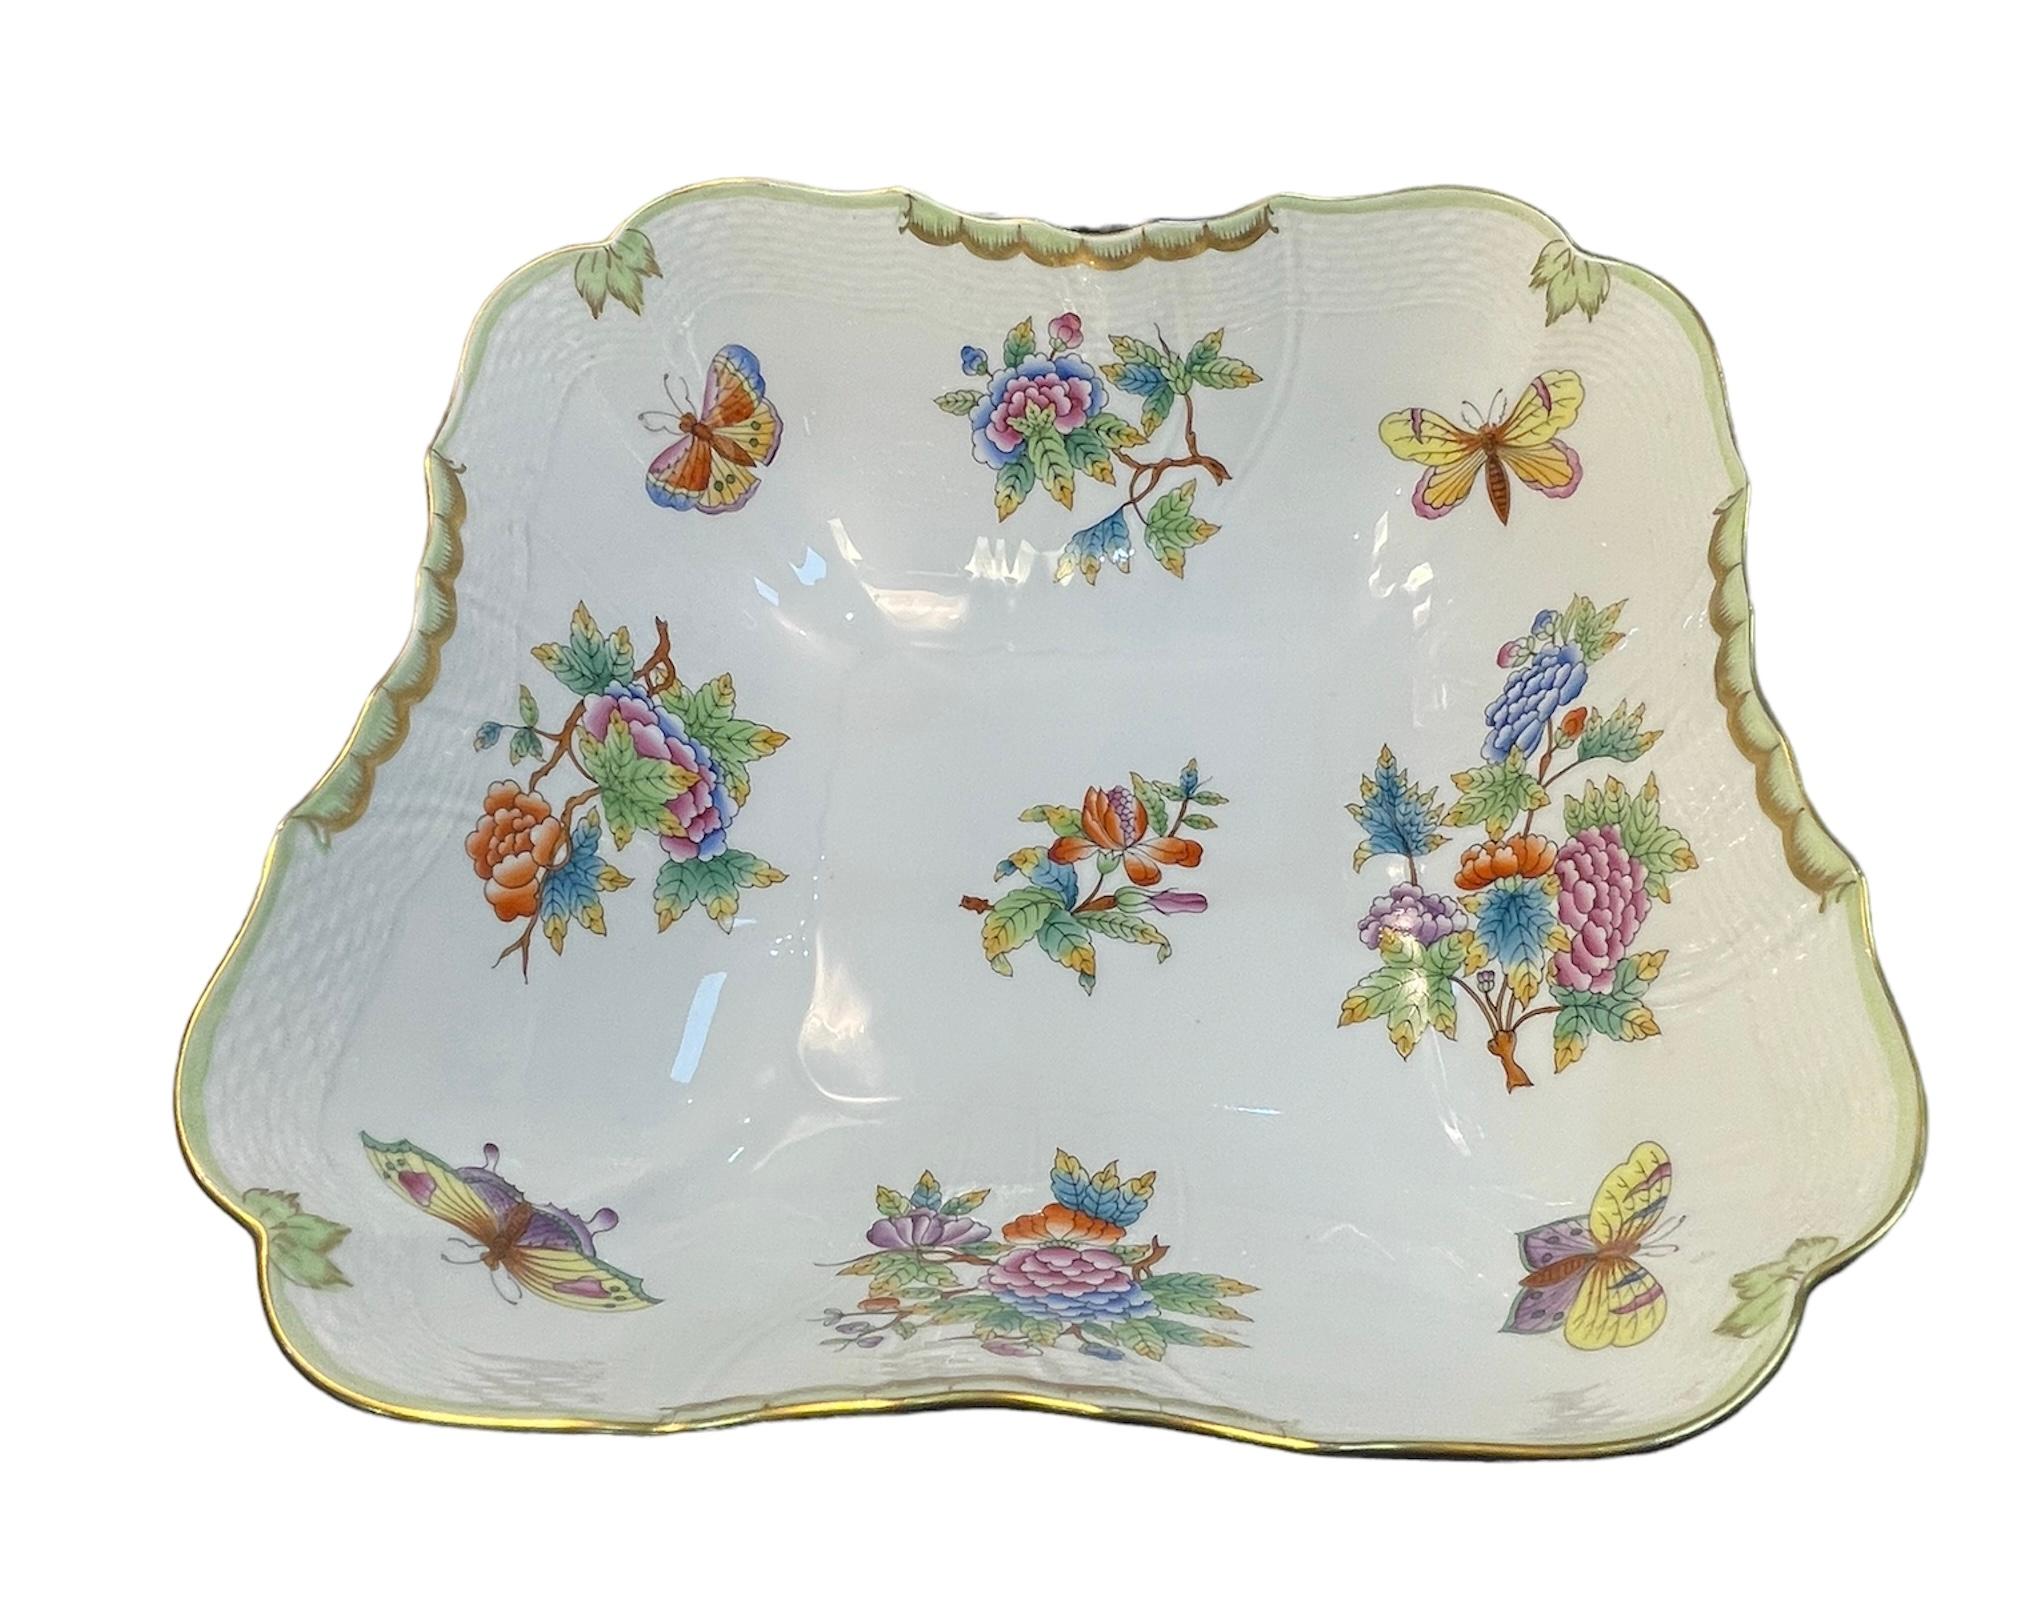 This is a Herend Porcelain Queen Victoria Pattern Salad Bowl. It depicts a square bowl decorated with colorful small bouquets of flowers and butterflies. The scalloped border is hand painted mint green color. It is enhanced by a gilt swag in some